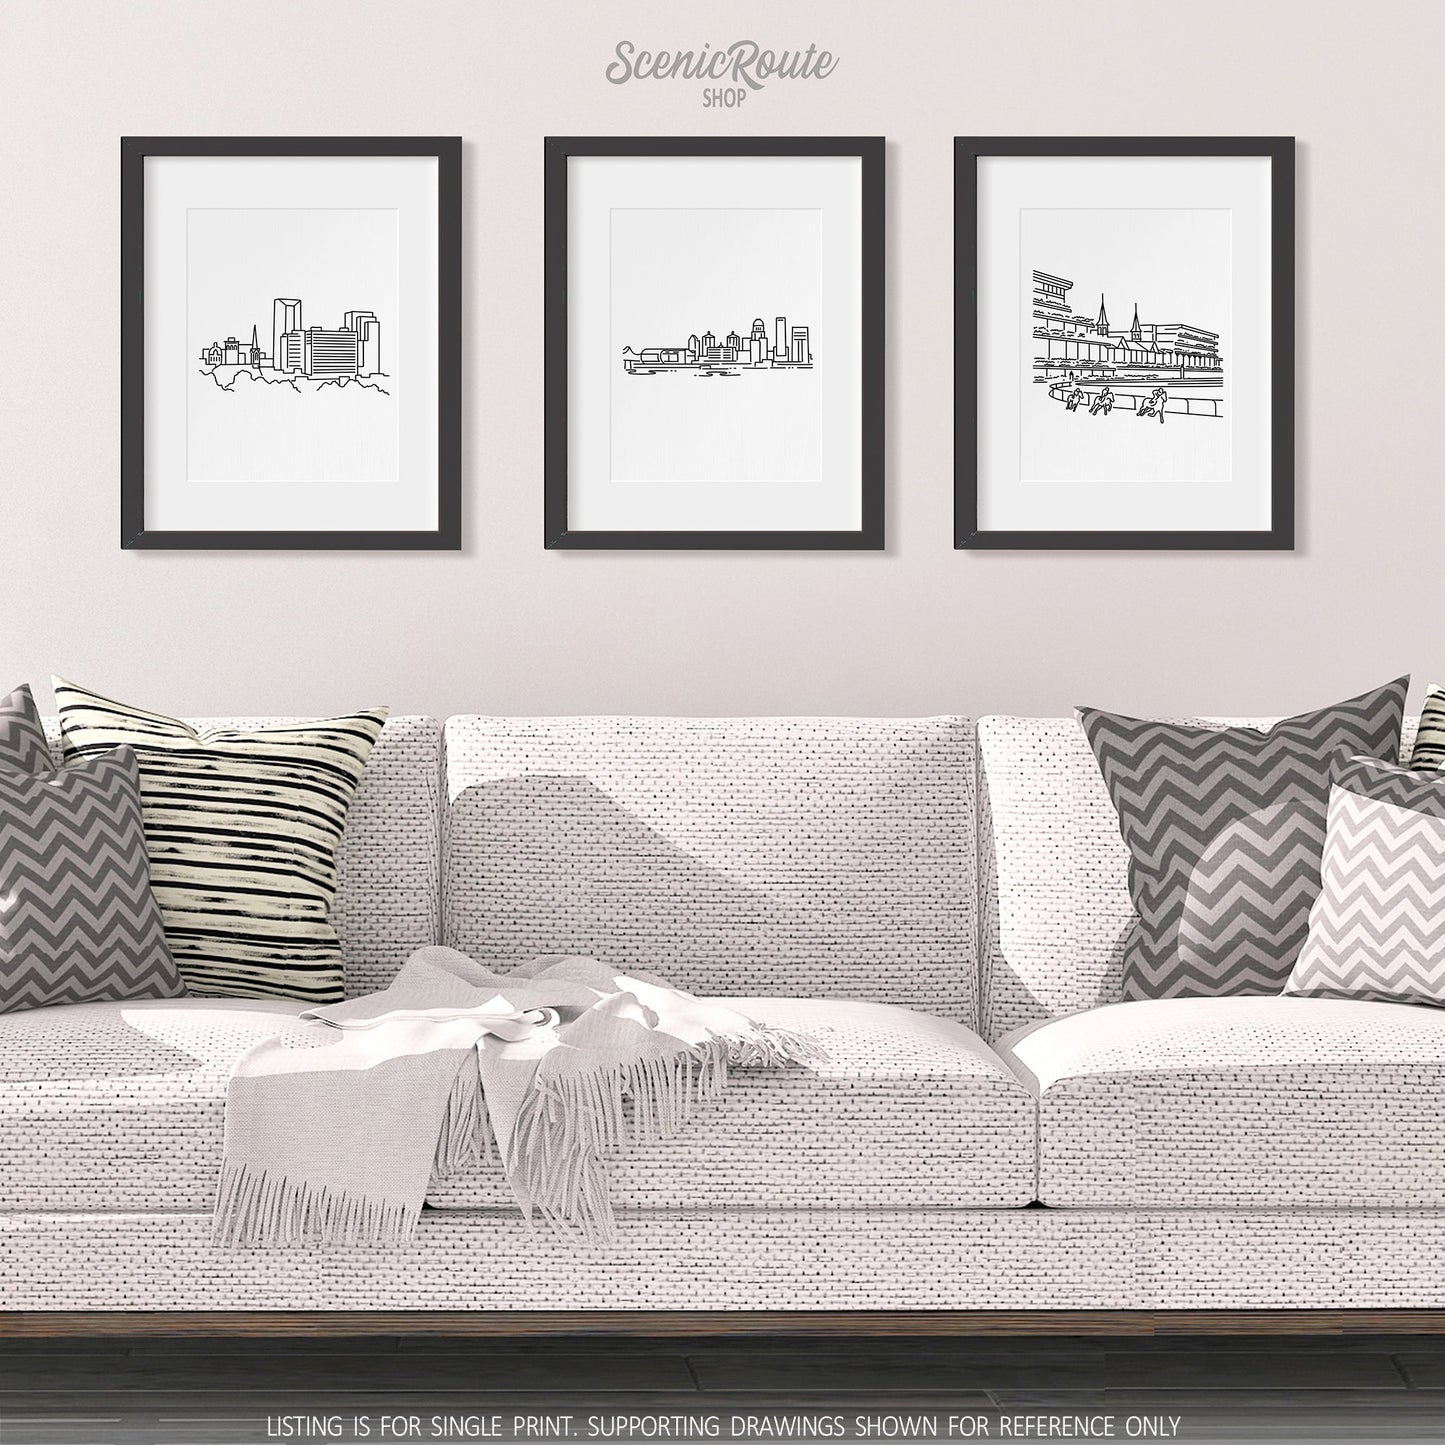 A group of three framed drawings on a white wall hanging above a couch with pillows and a blanket. The line art drawings include the Lexington Skyline, Louisville Skyline, and Churchill Downs